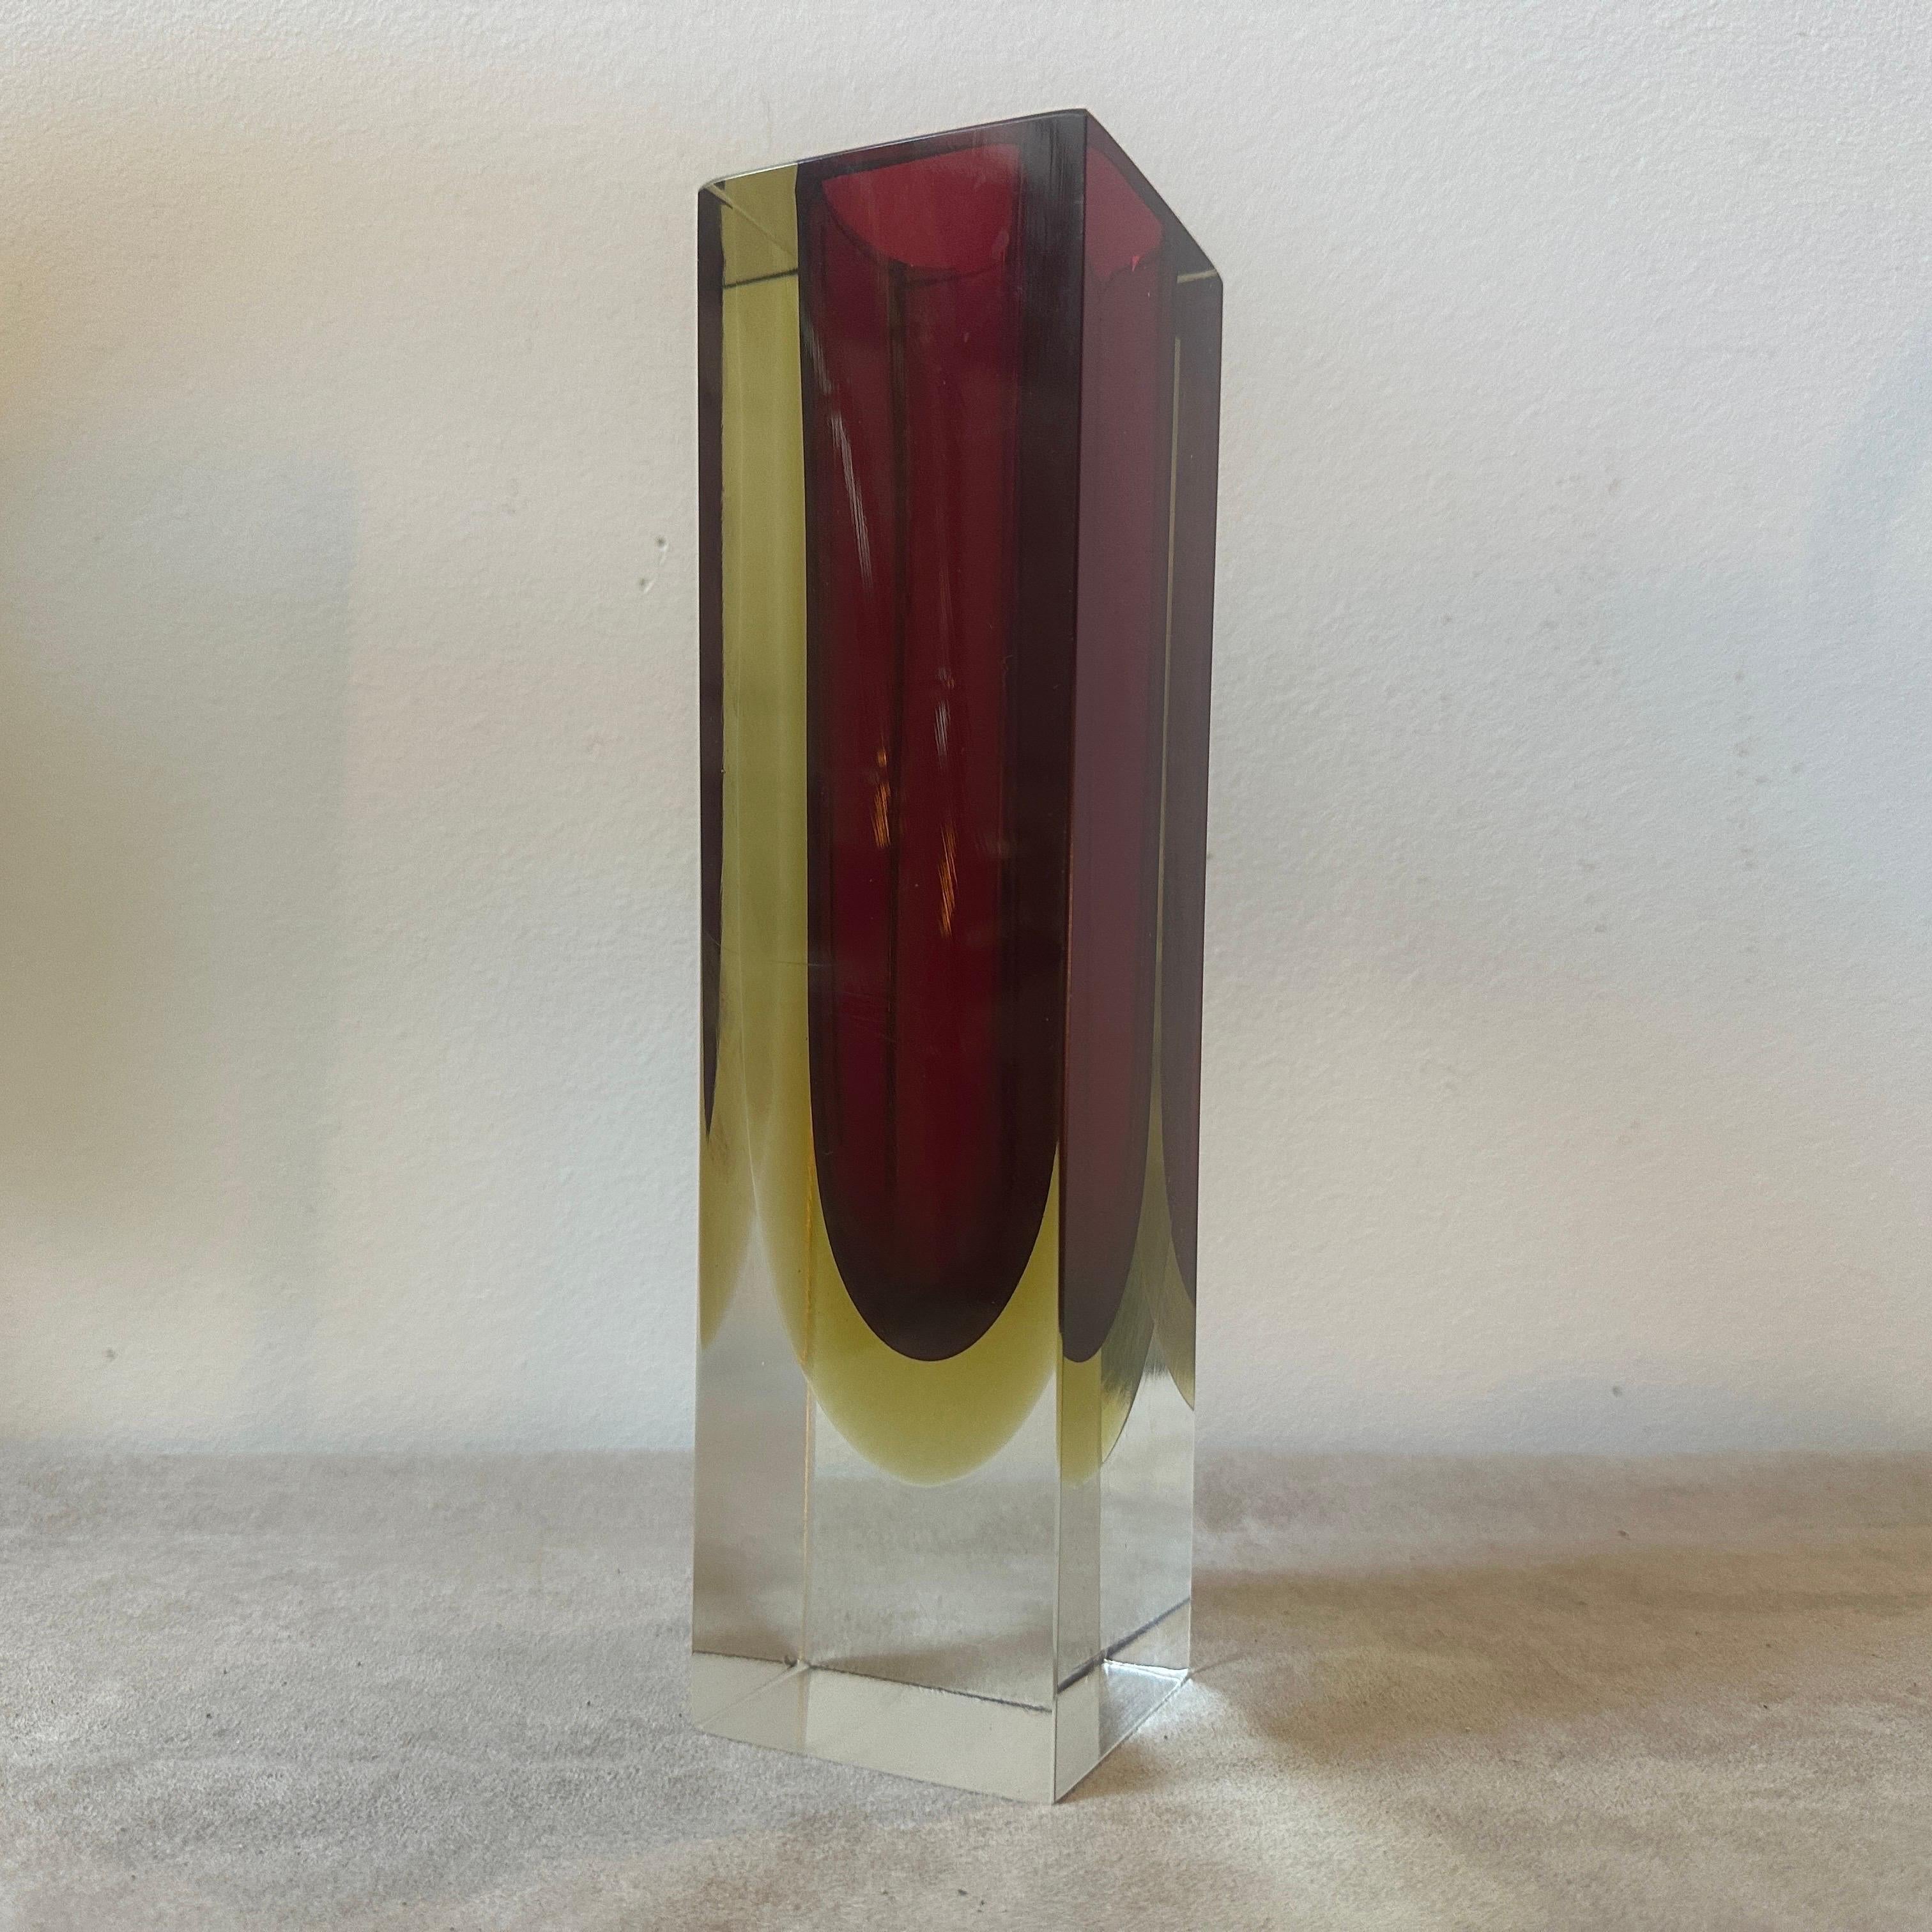 20th Century 1960s, Modernist Red and Yellow Sommerso Murano Glass Square Vase by Seguso For Sale